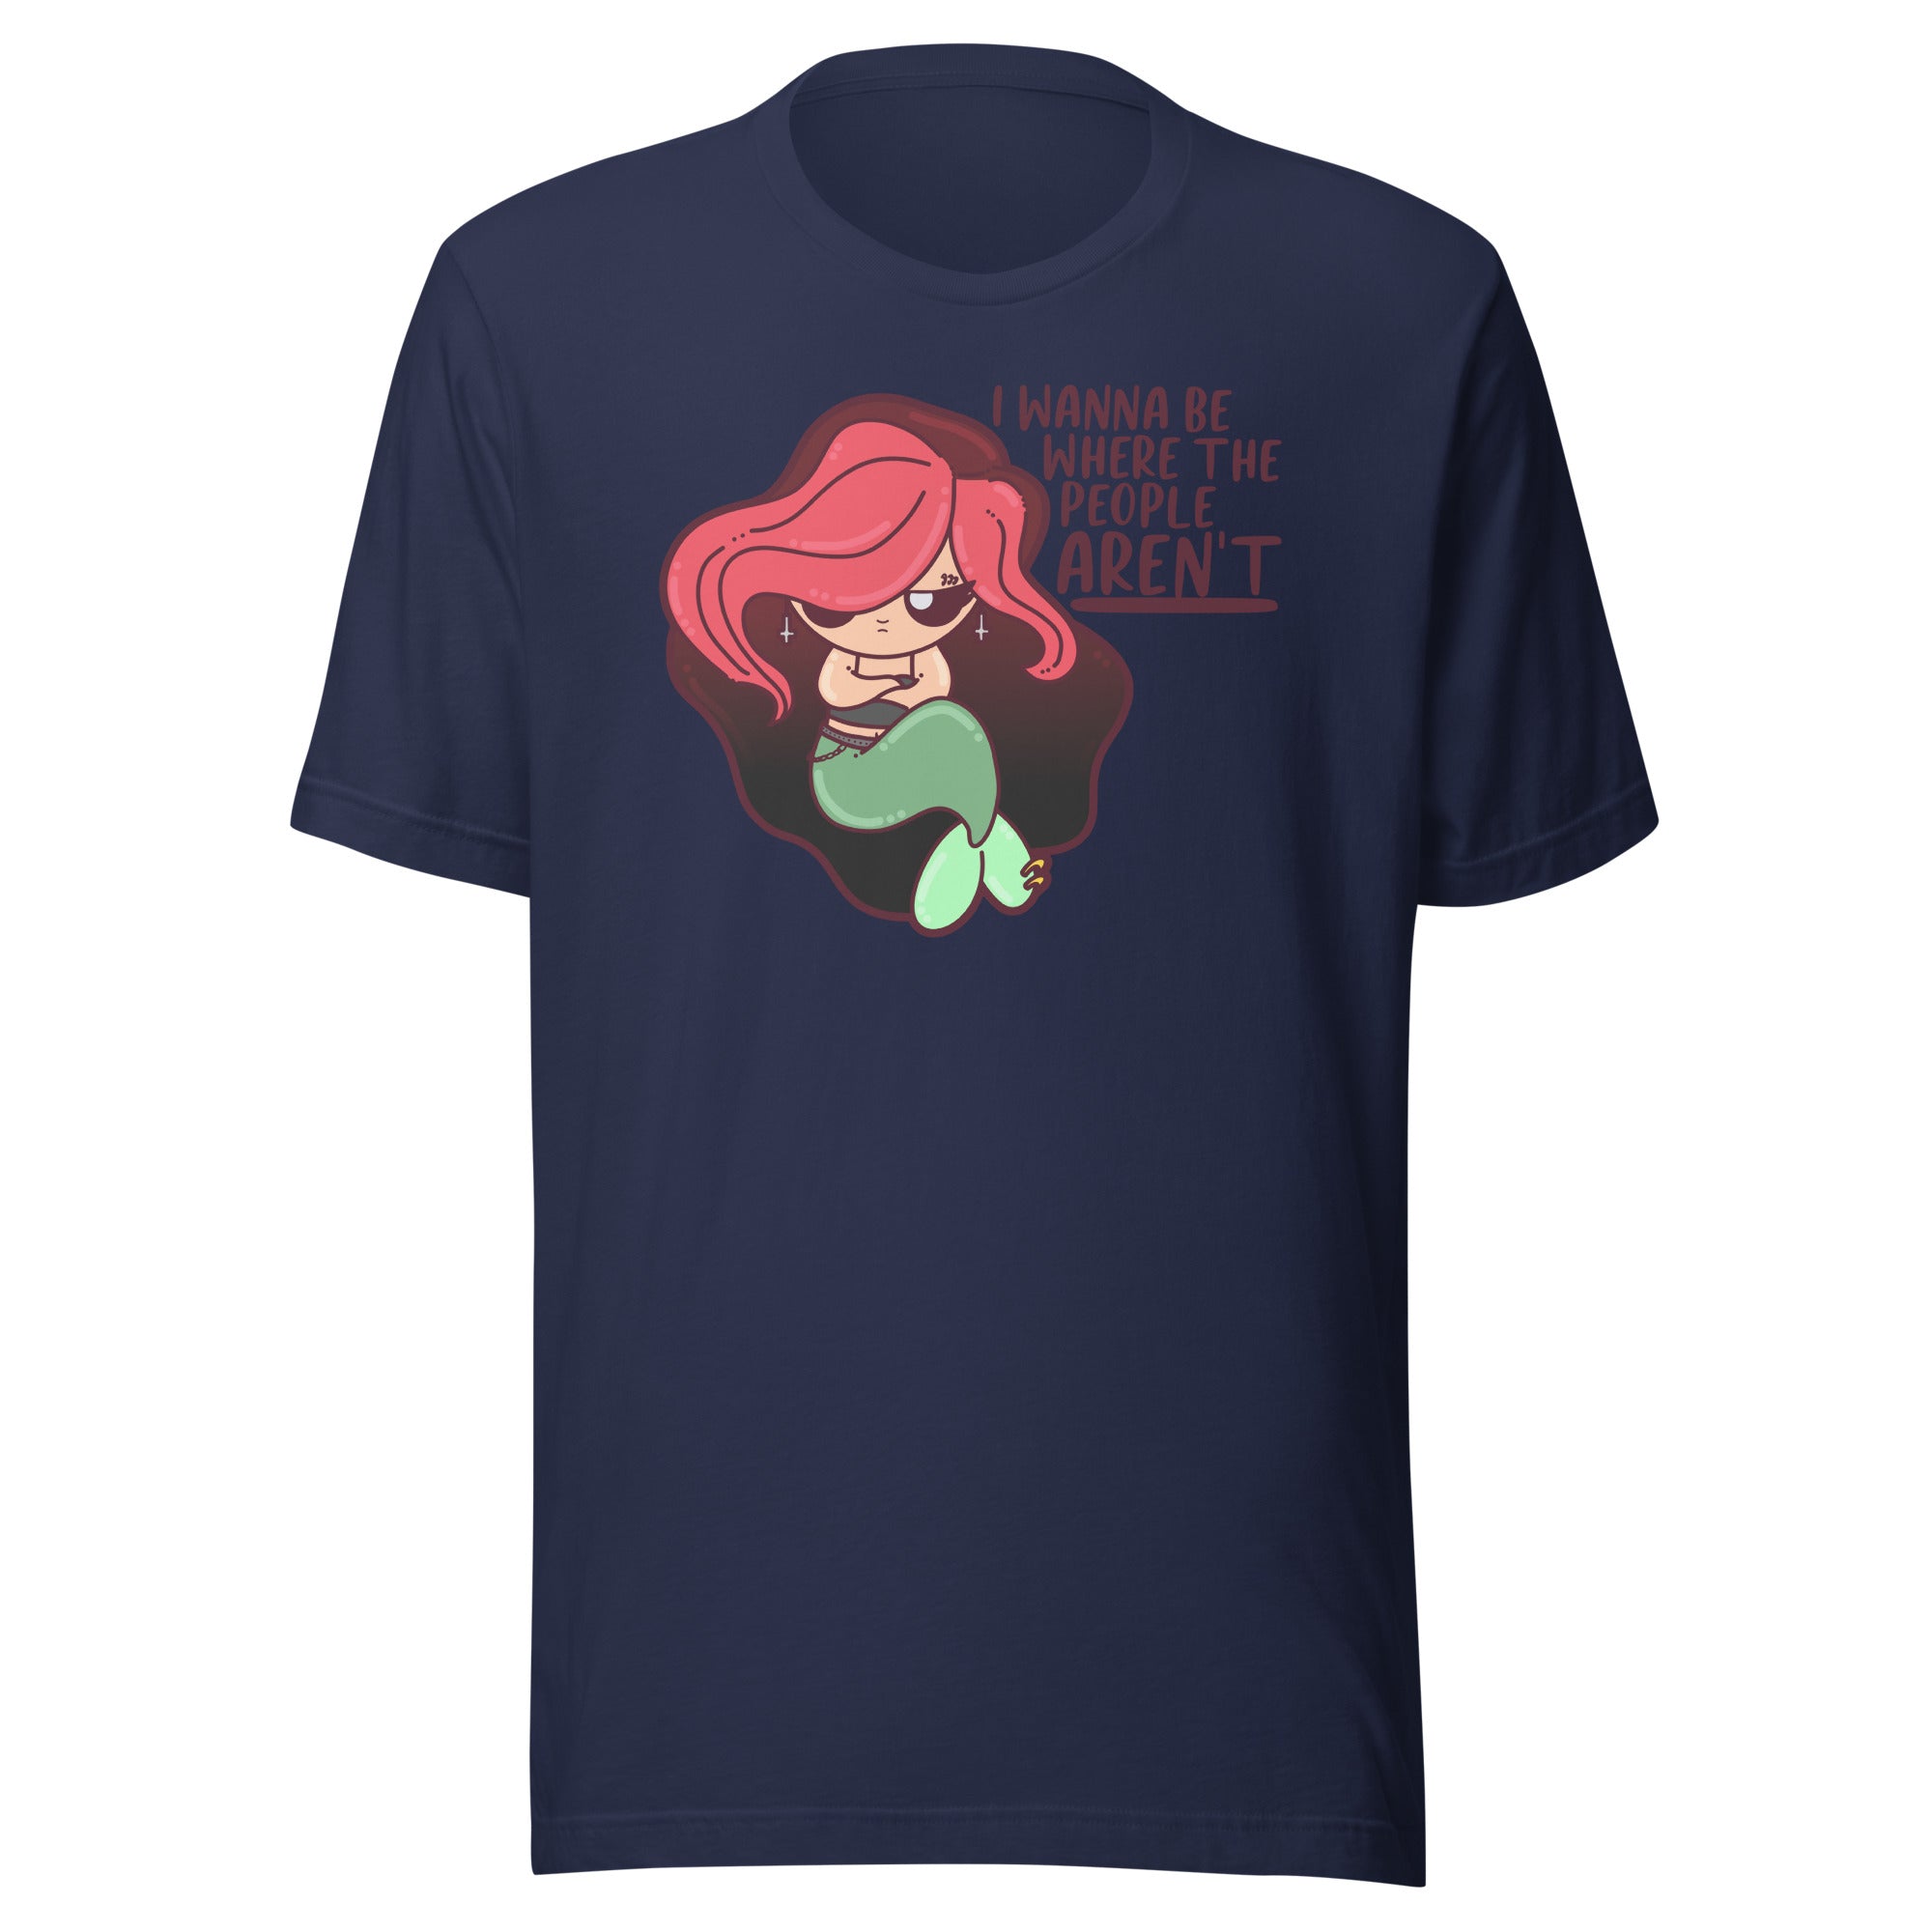 I WANT TO BE WHERE THE PEOPLE ARENT - Tee - ChubbleGumLLC